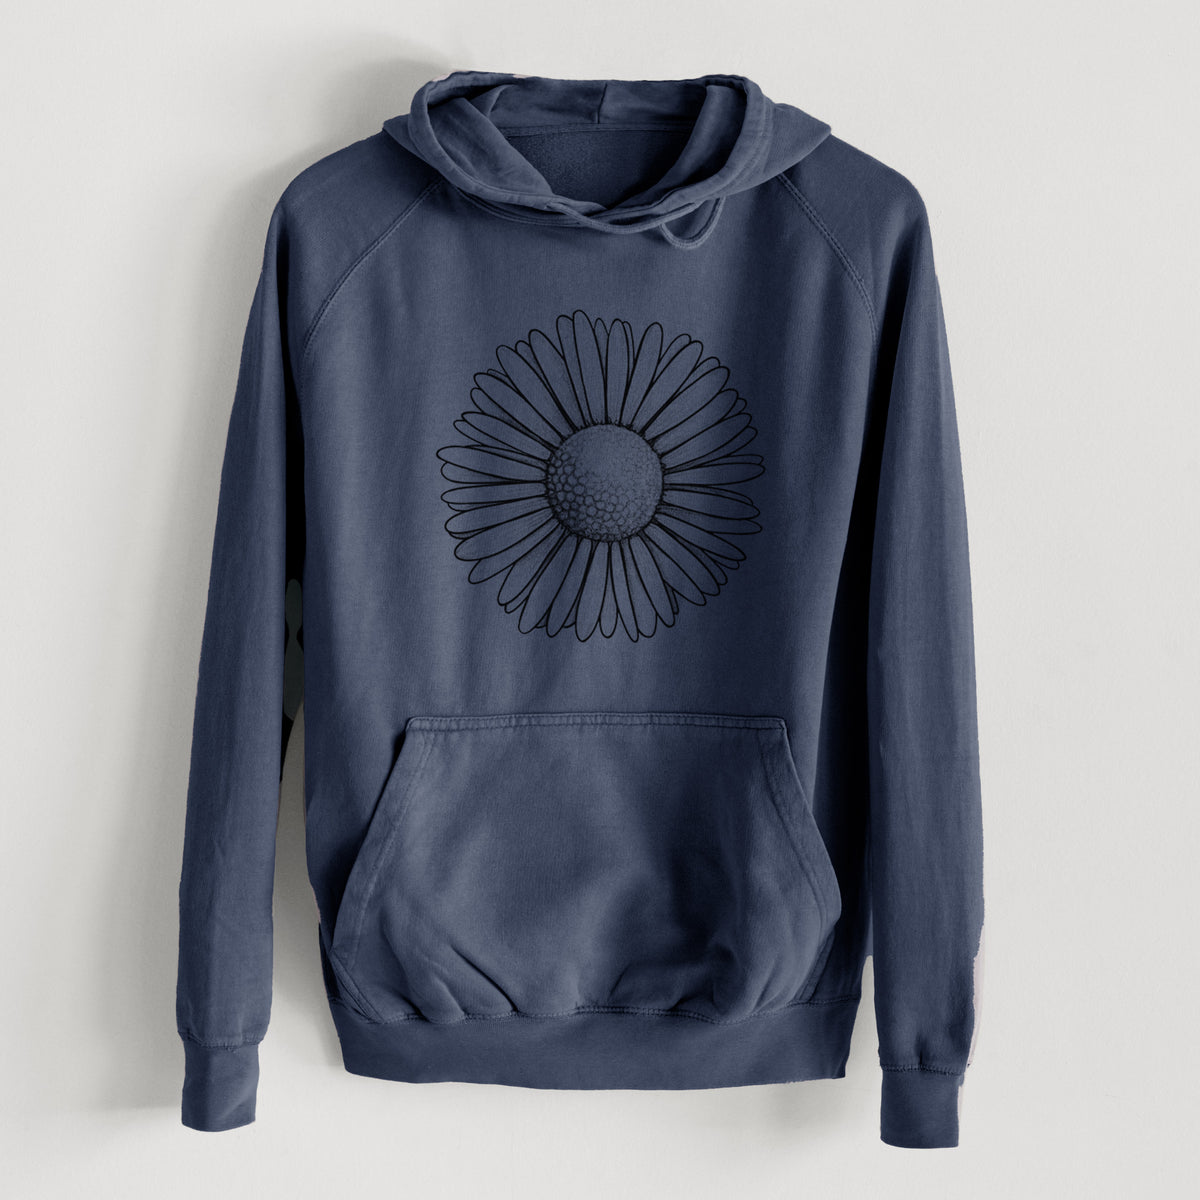 Bellis perennis - The Common Daisy  - Mid-Weight Unisex Vintage 100% Cotton Hoodie